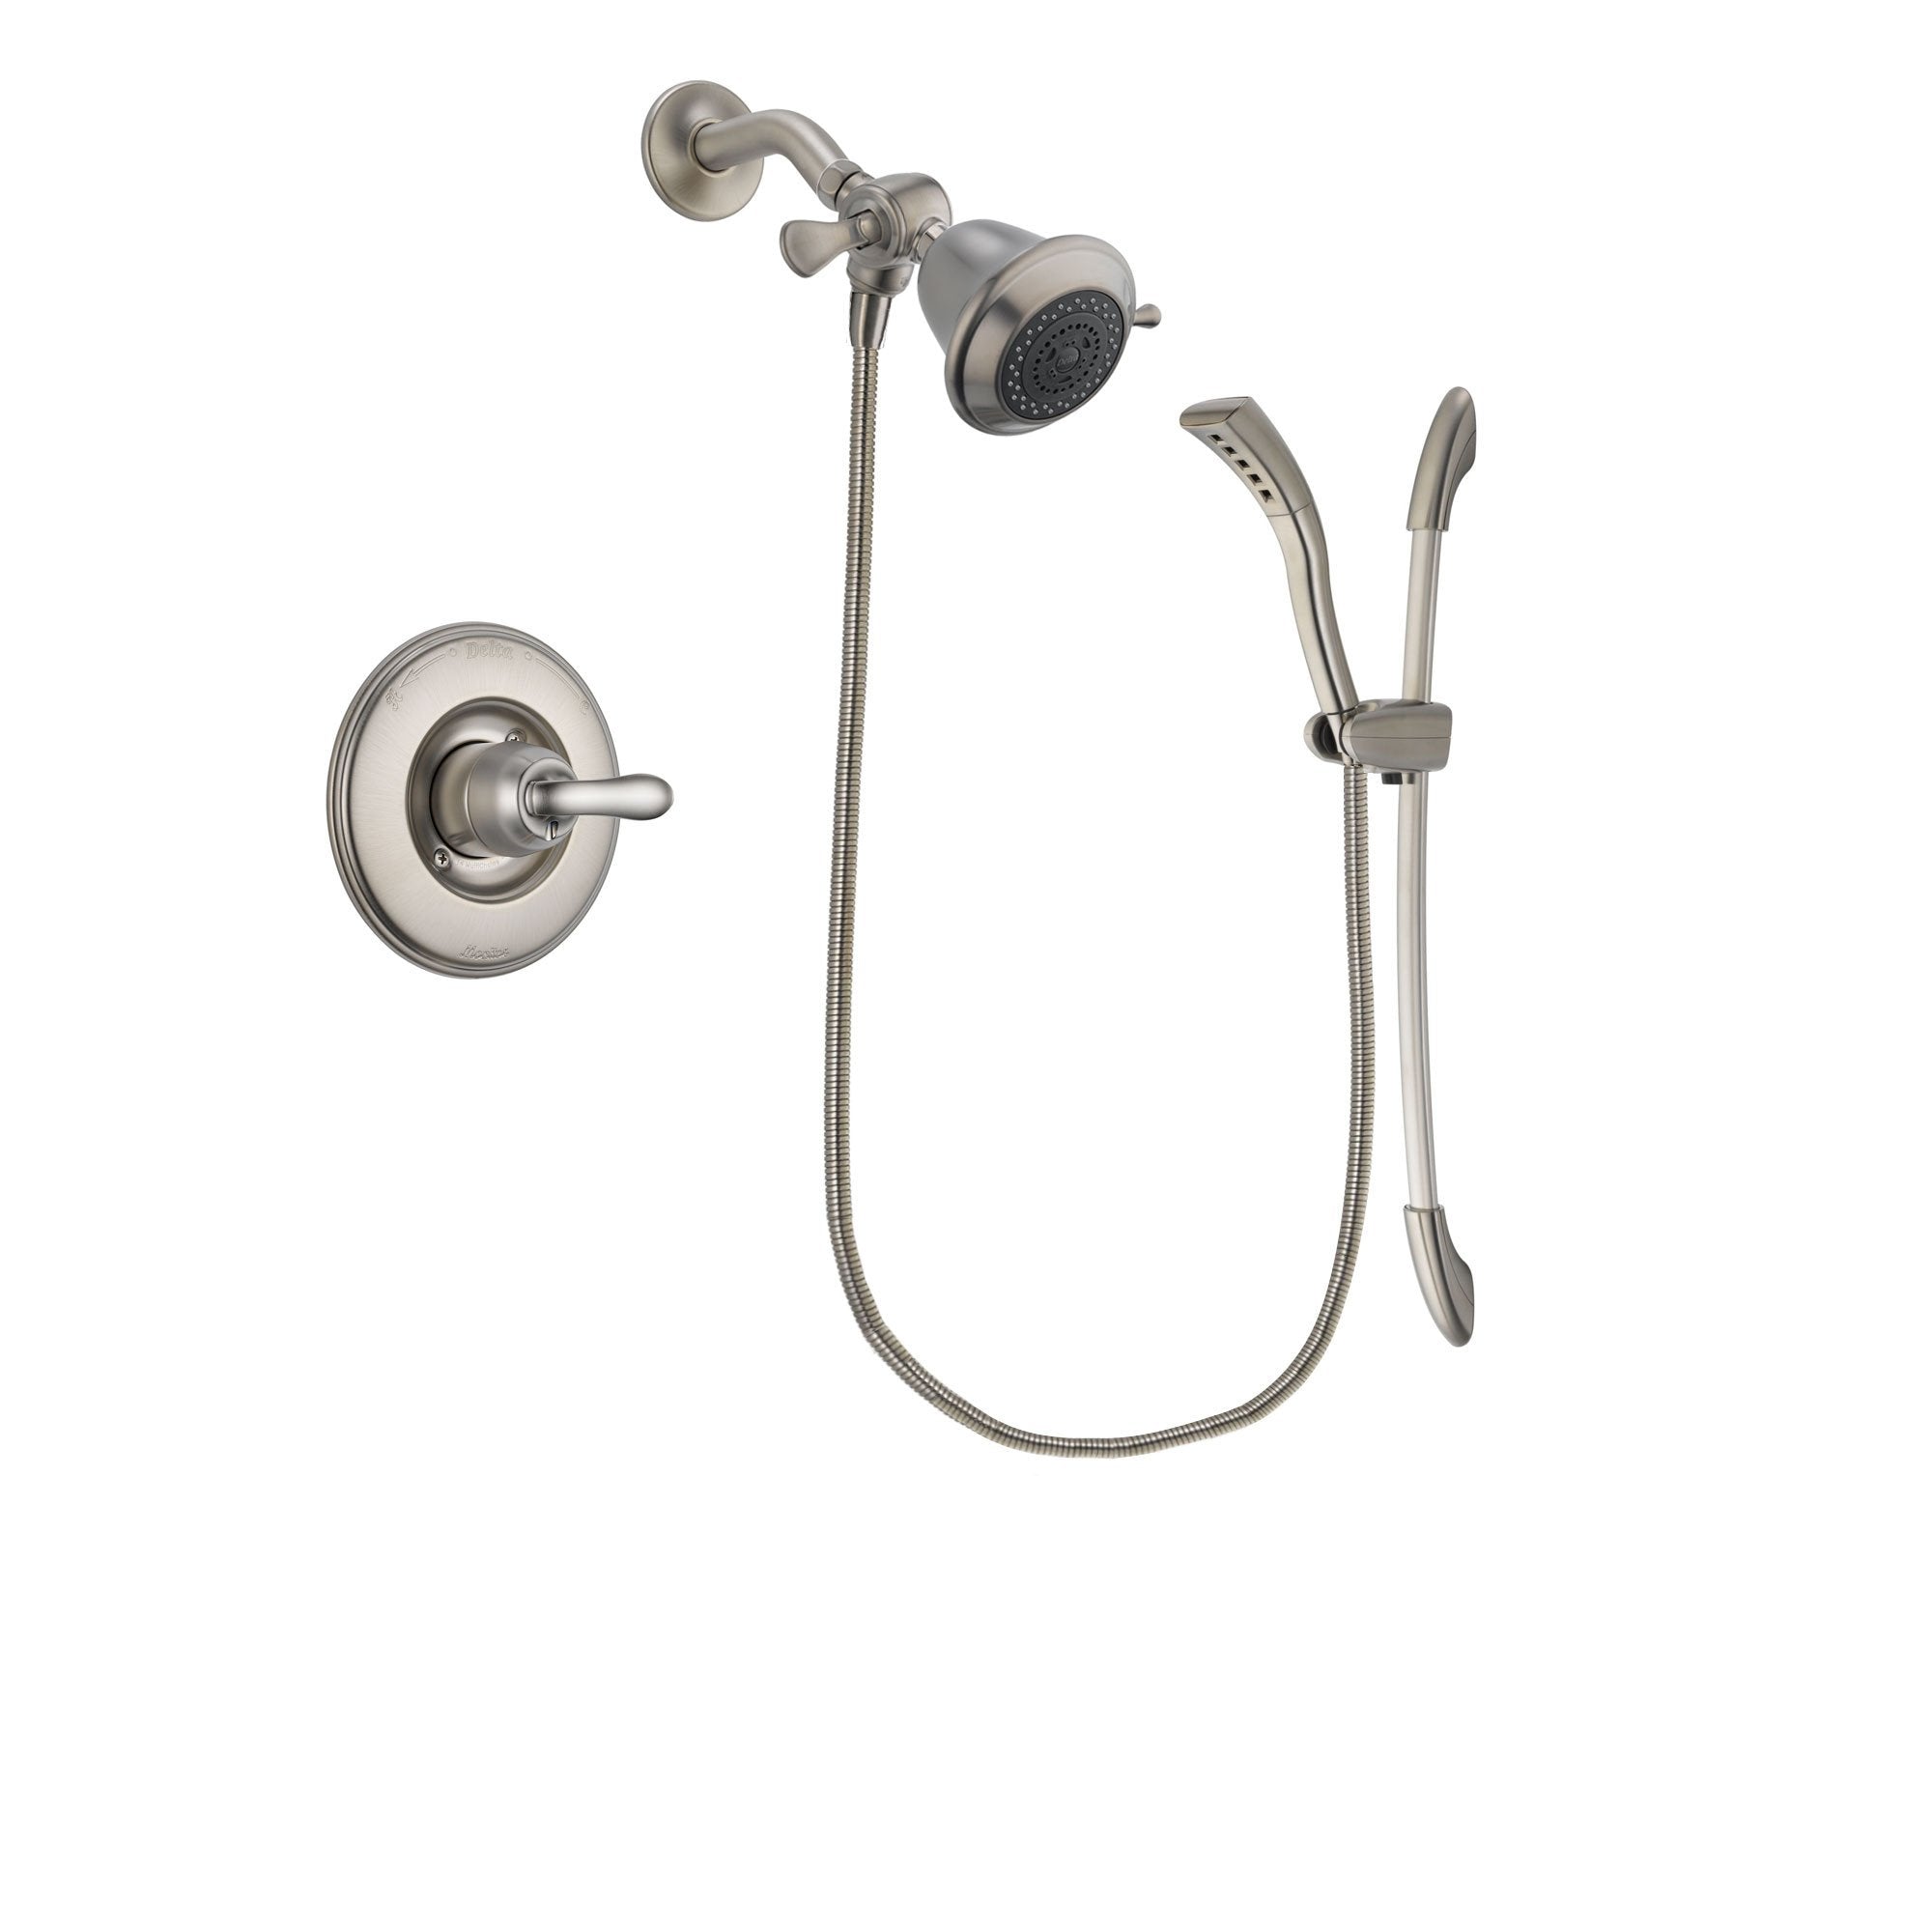 Delta Linden Stainless Steel Finish Shower Faucet System Package with Shower Head and Handshower with Slide Bar Includes Rough-in Valve DSP1396V